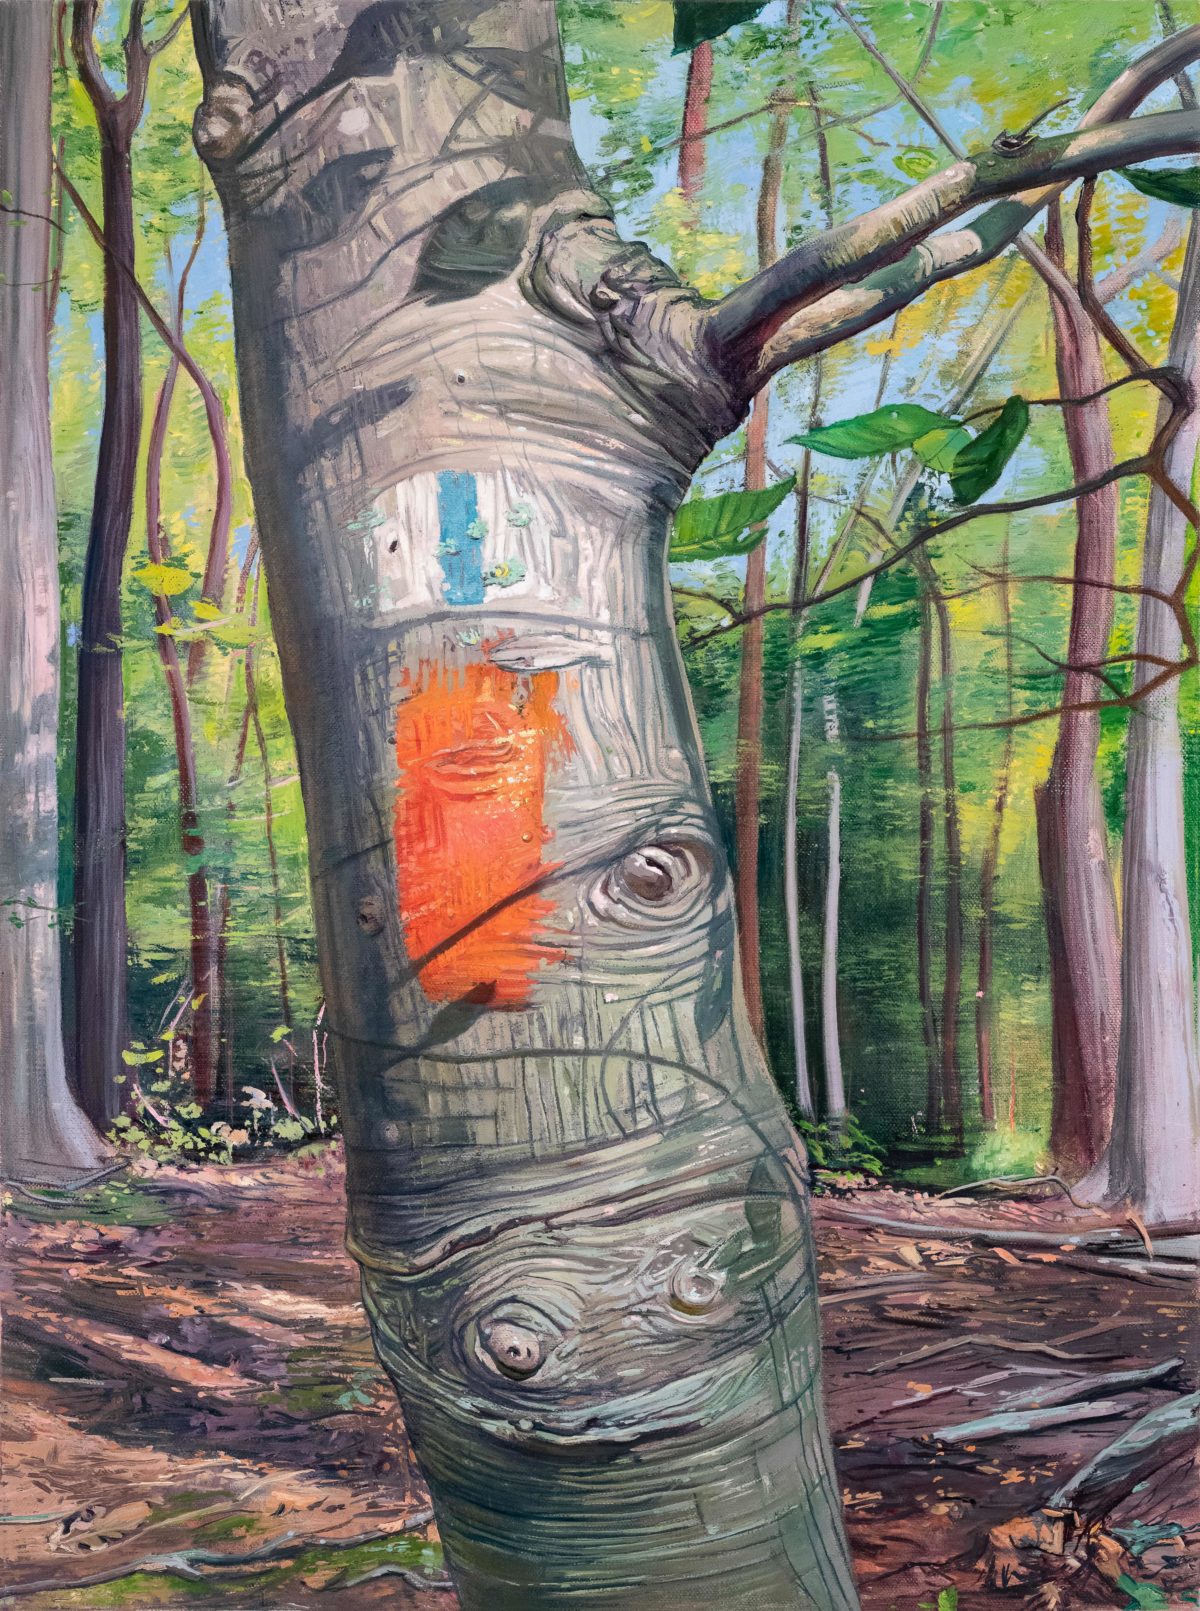 a painting by melanie vote presenting a close up on a tree trunk with painted marks resembling an eye